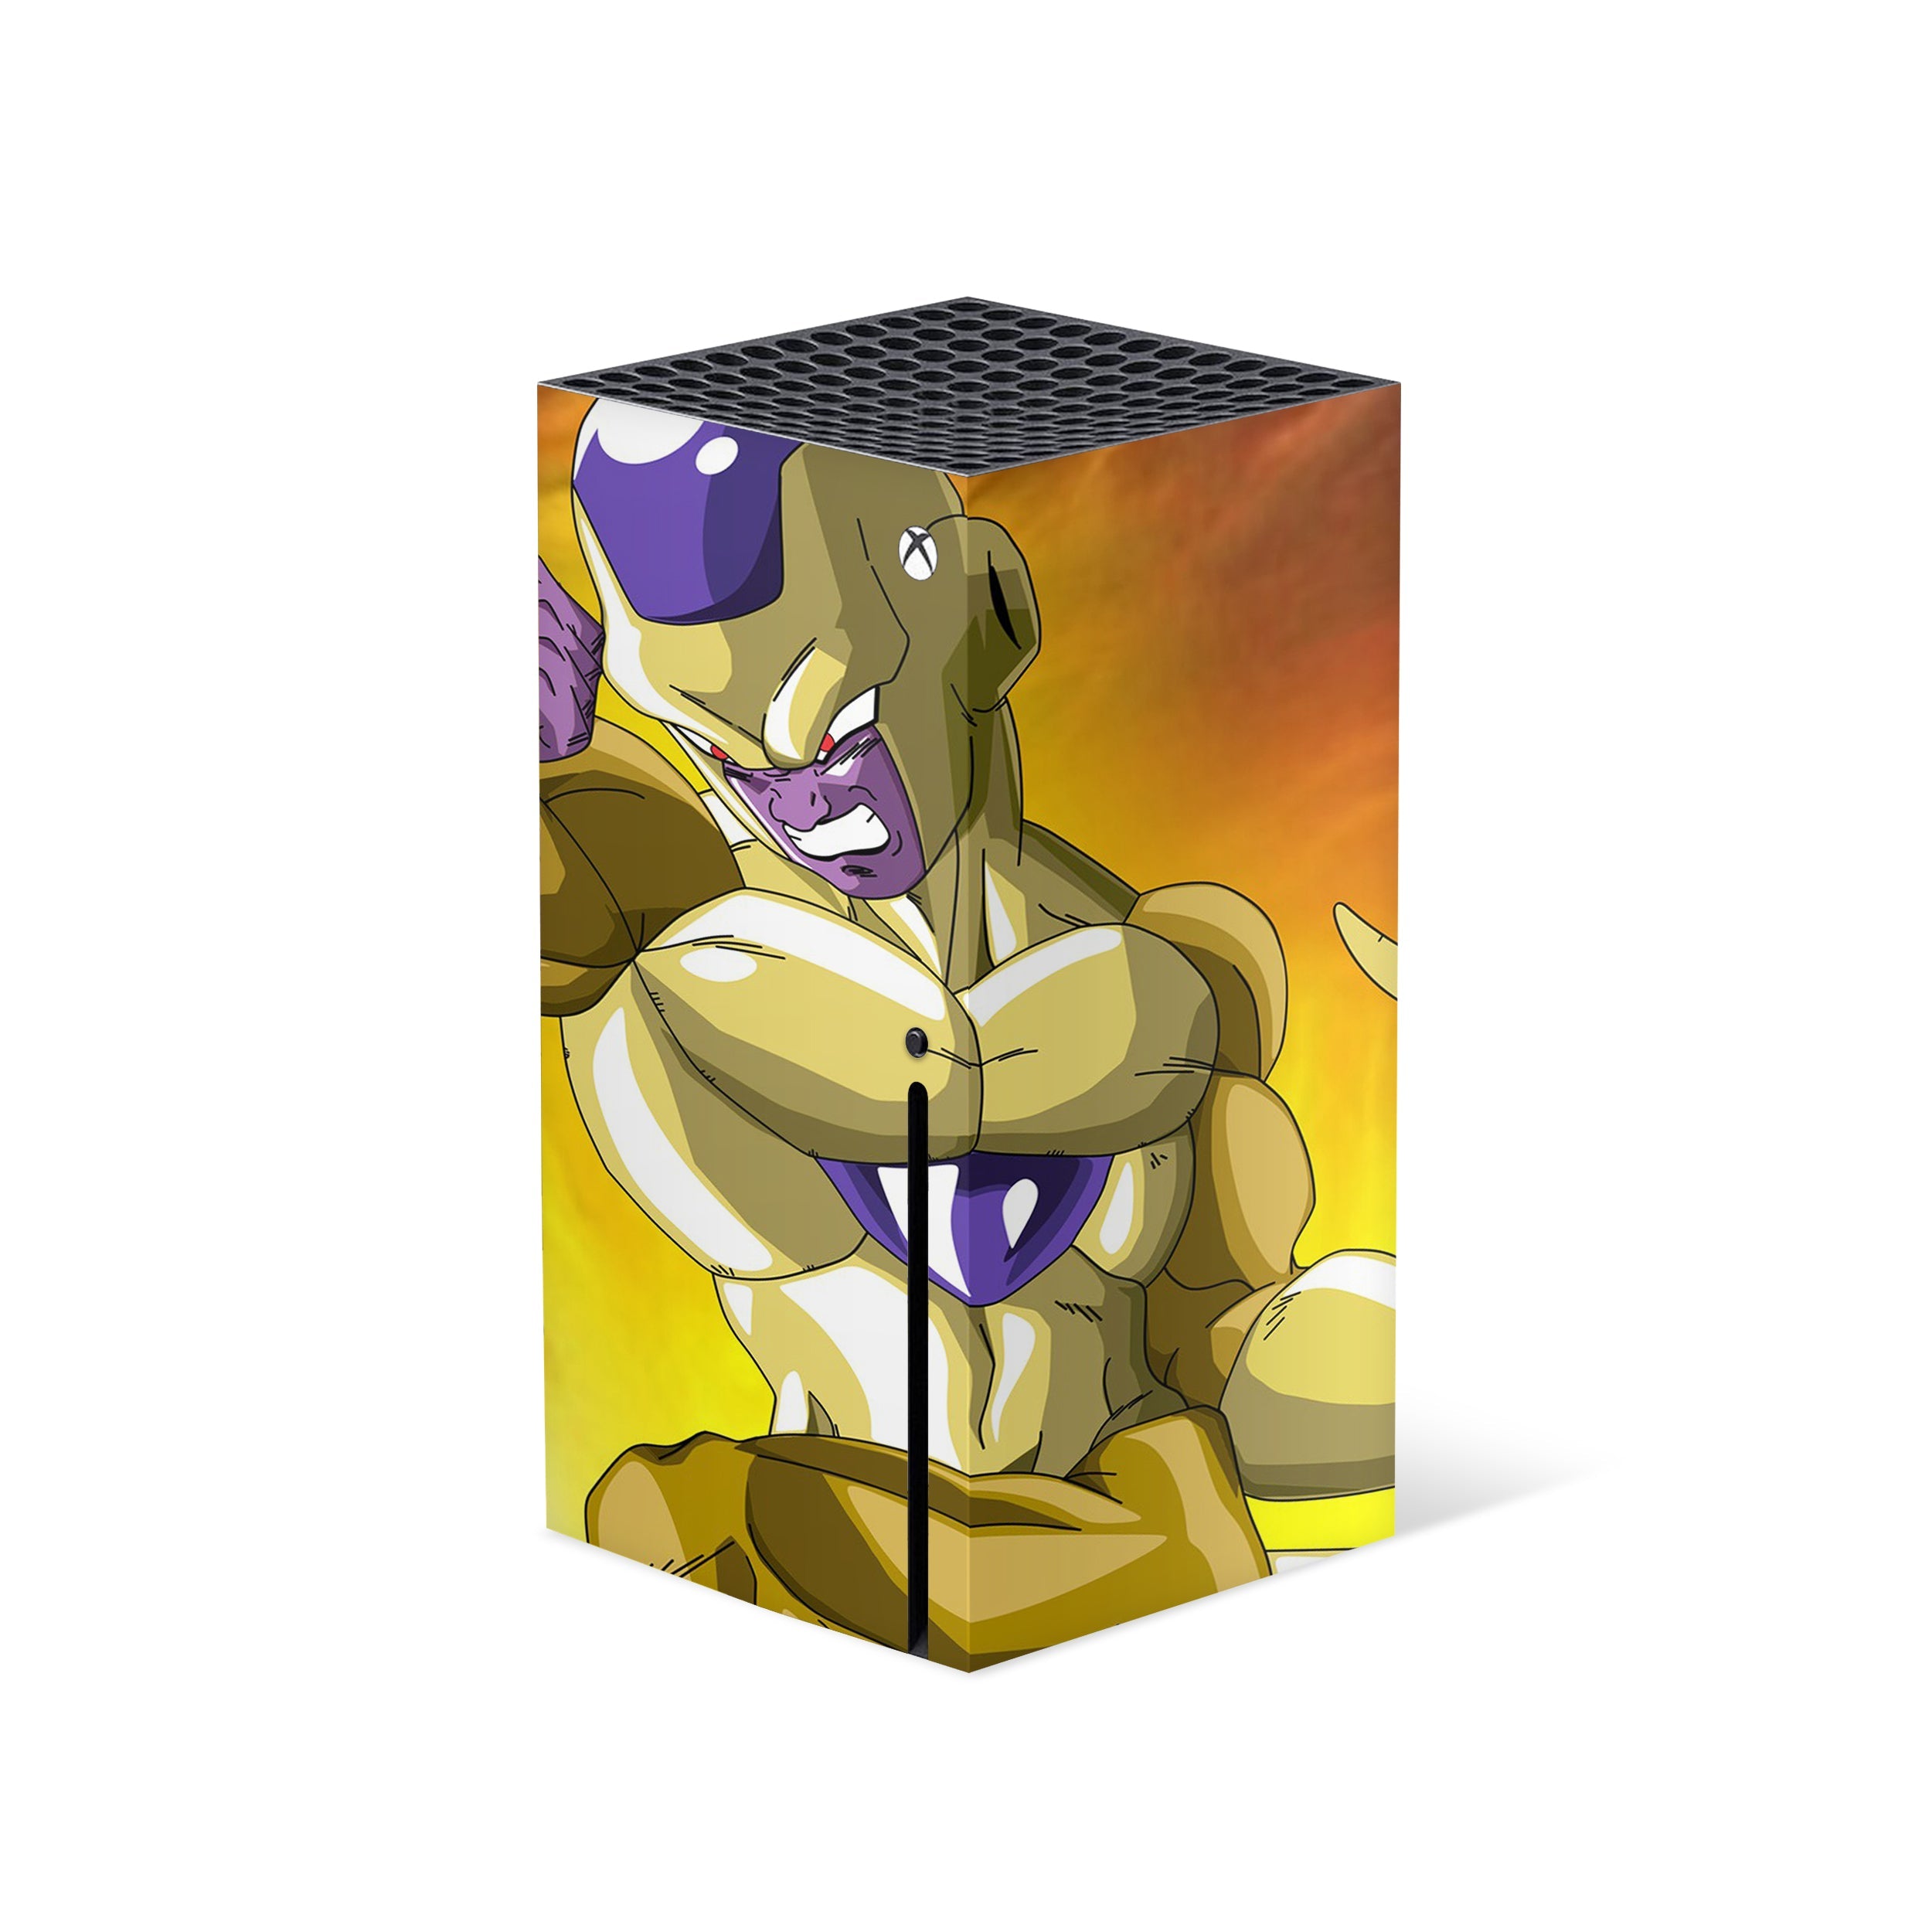 A video game skin featuring a Dragon Ball Super Frieza design for the Xbox Series X.